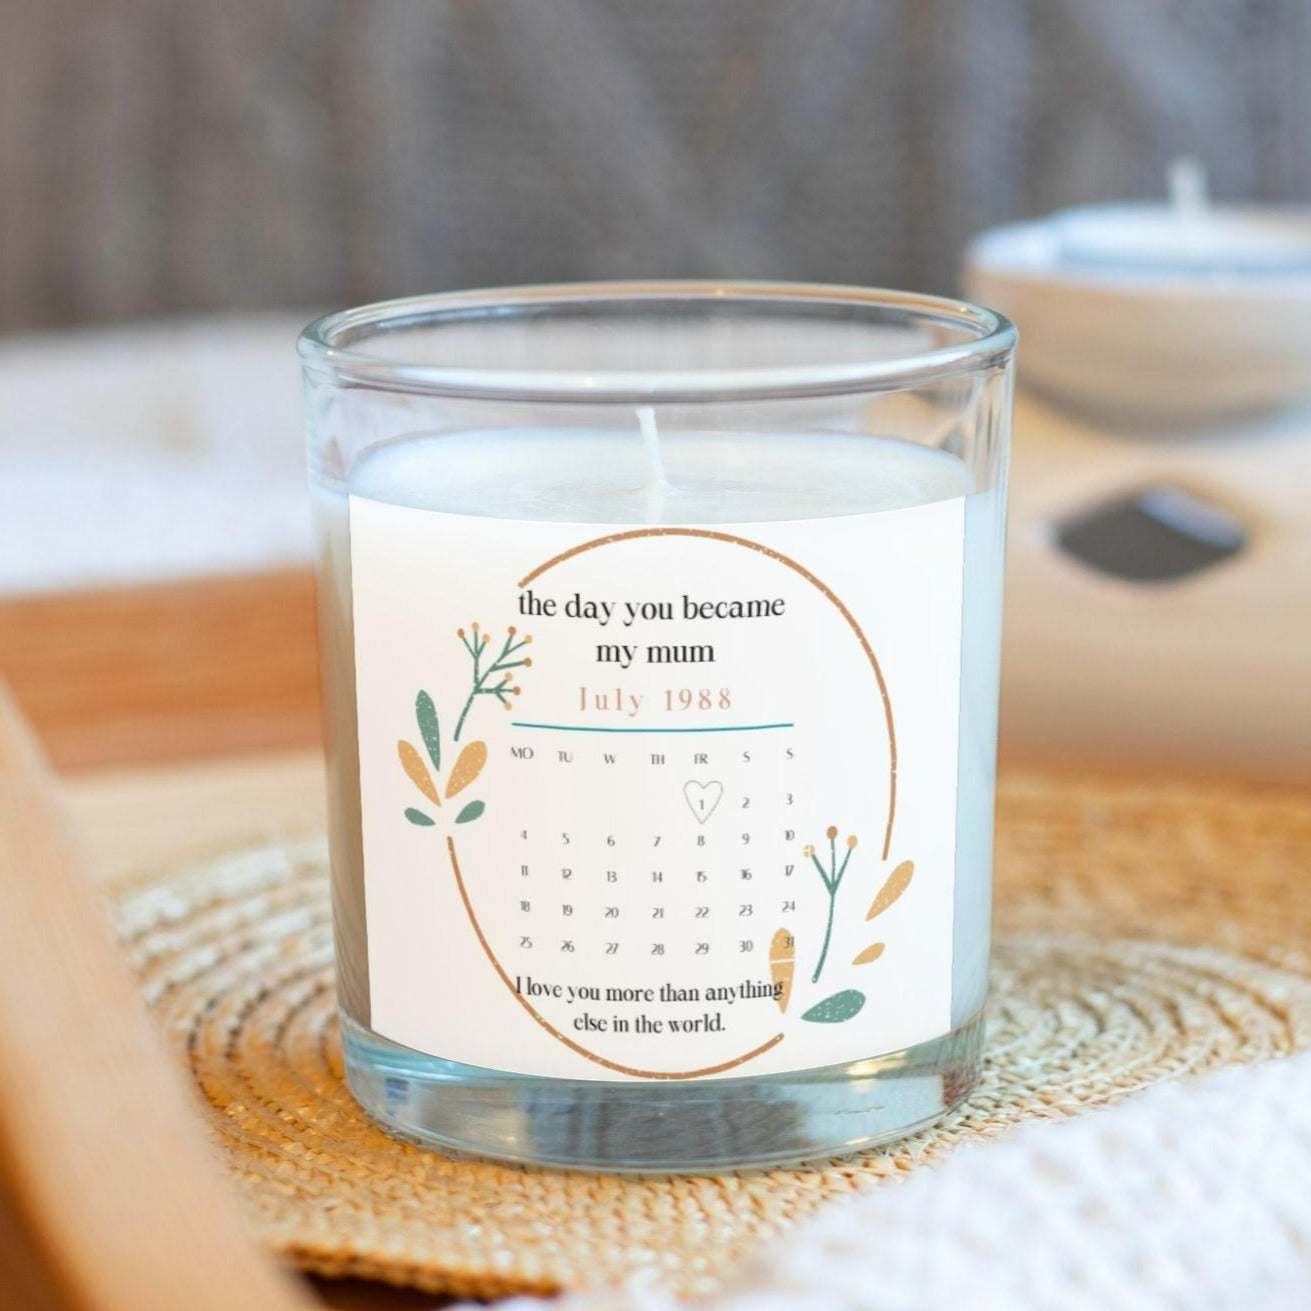 Personalized Candles offer a Unique Easter Gift for Your Customers! - Ella  B. Candles